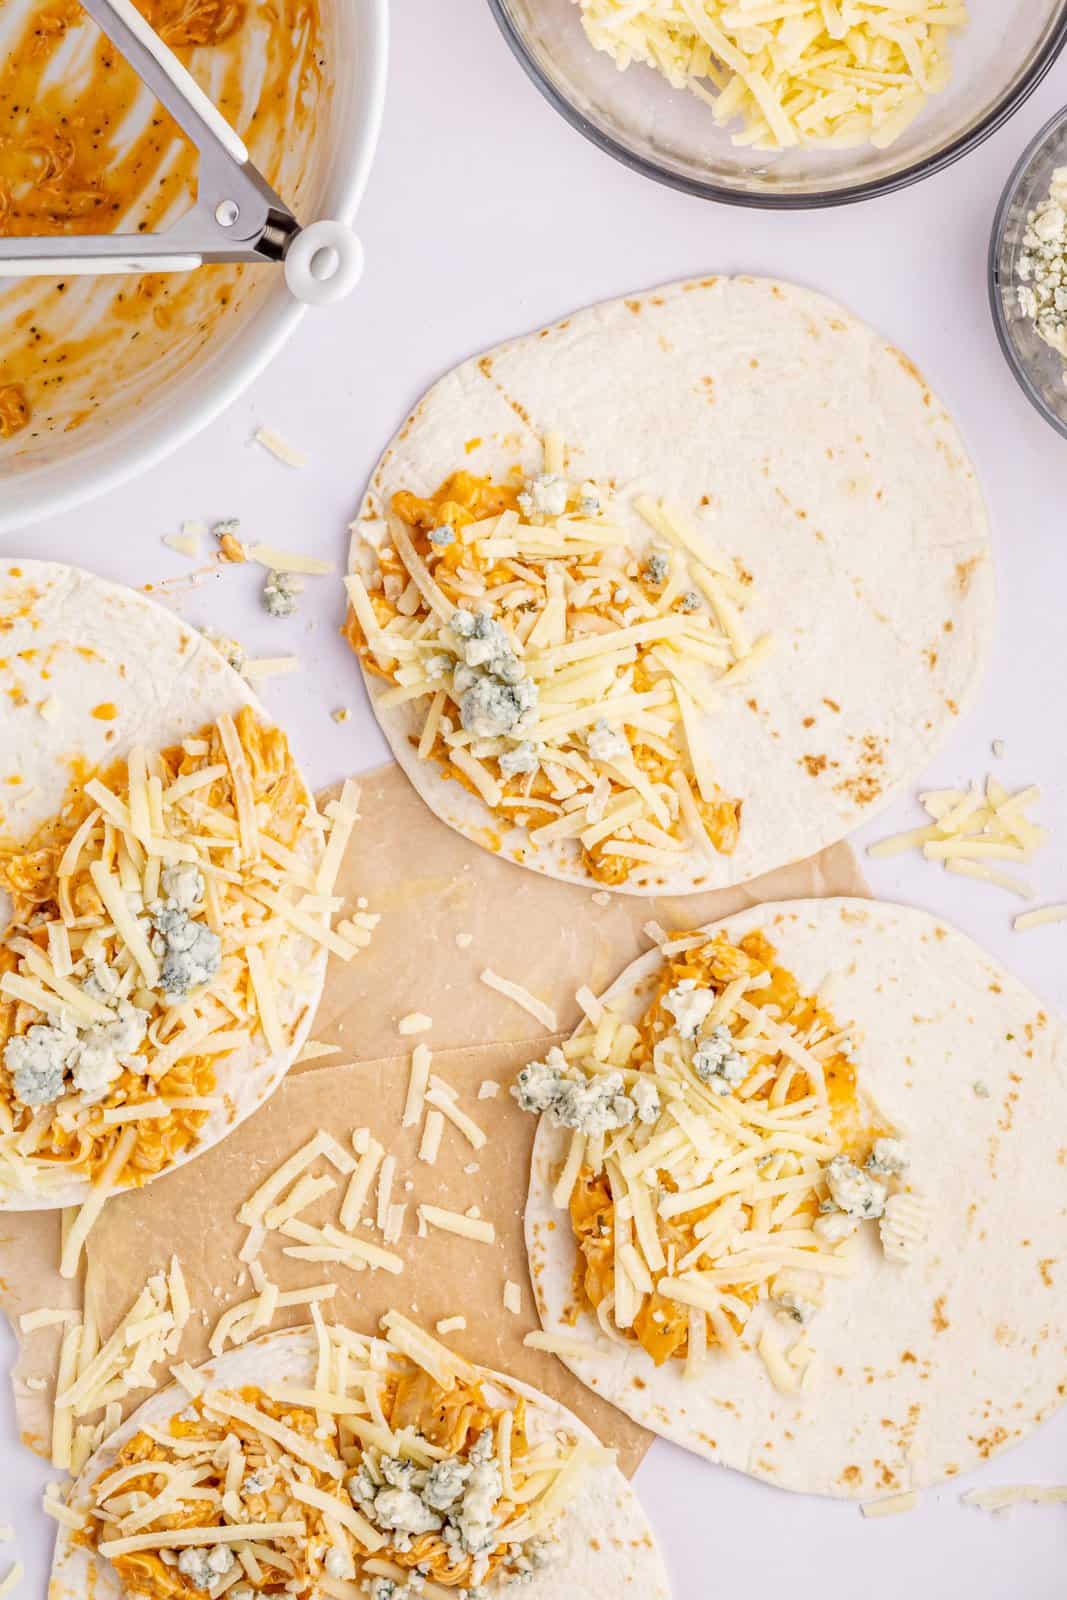 Tortillas with buffalo chicken, shredded cheese, and bleu cheese on top.